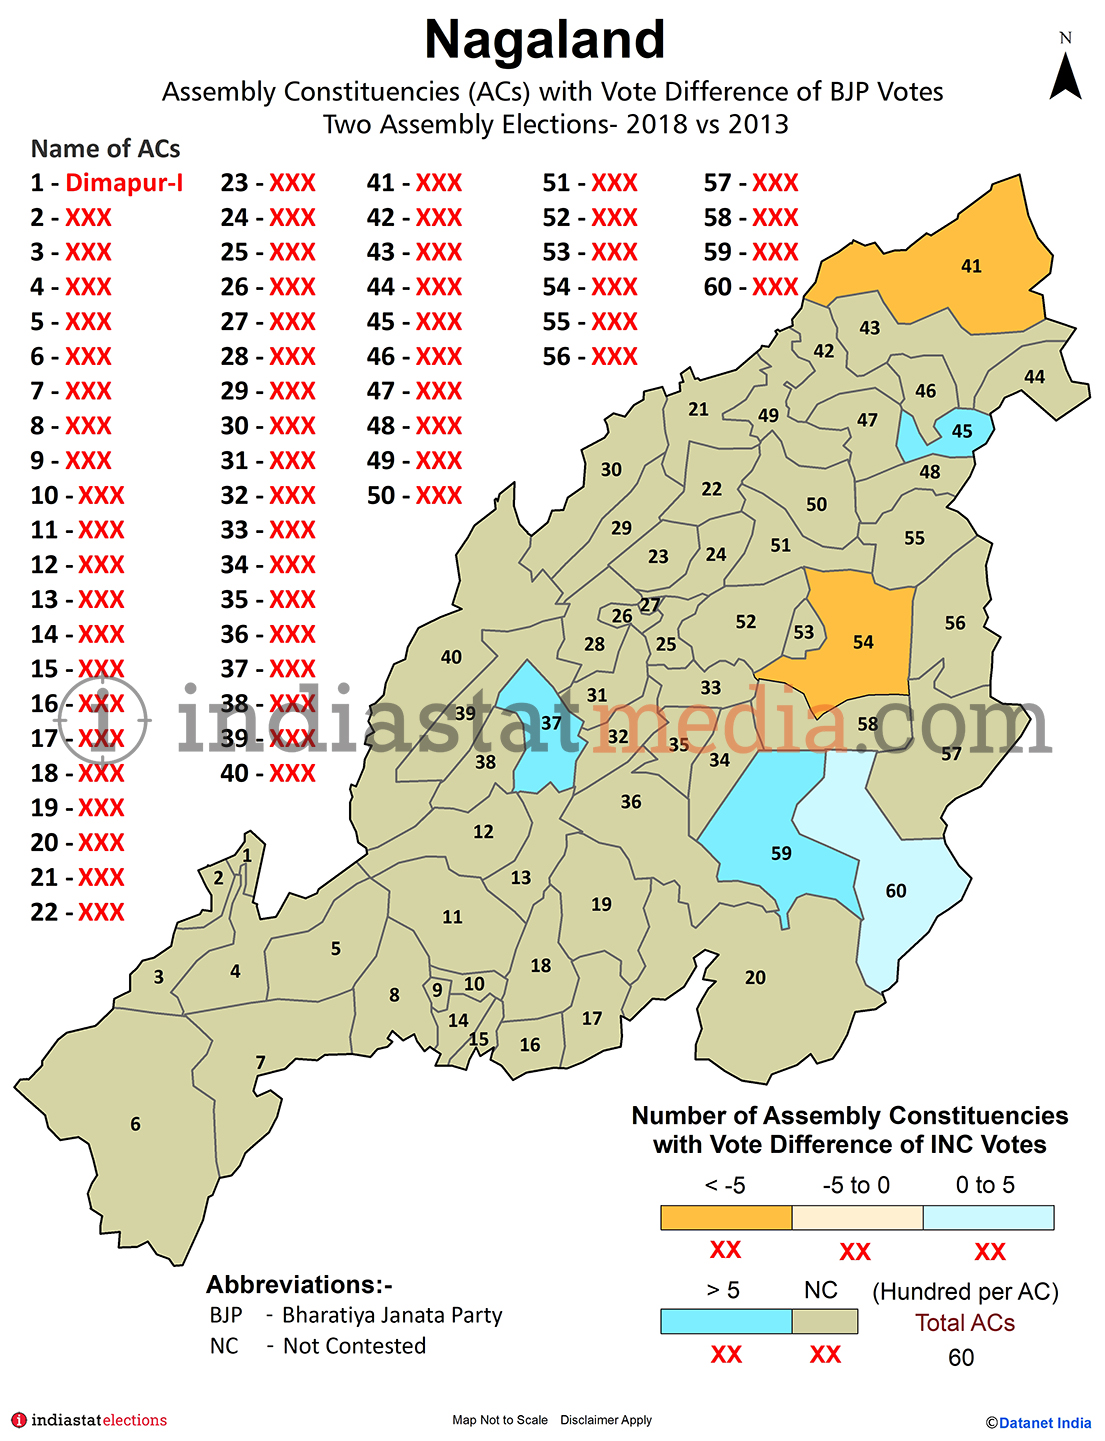 Assembly Constituencies with Vote Difference of BJP Votes in Nagaland (Assembly Elections - 2013 & 2018)